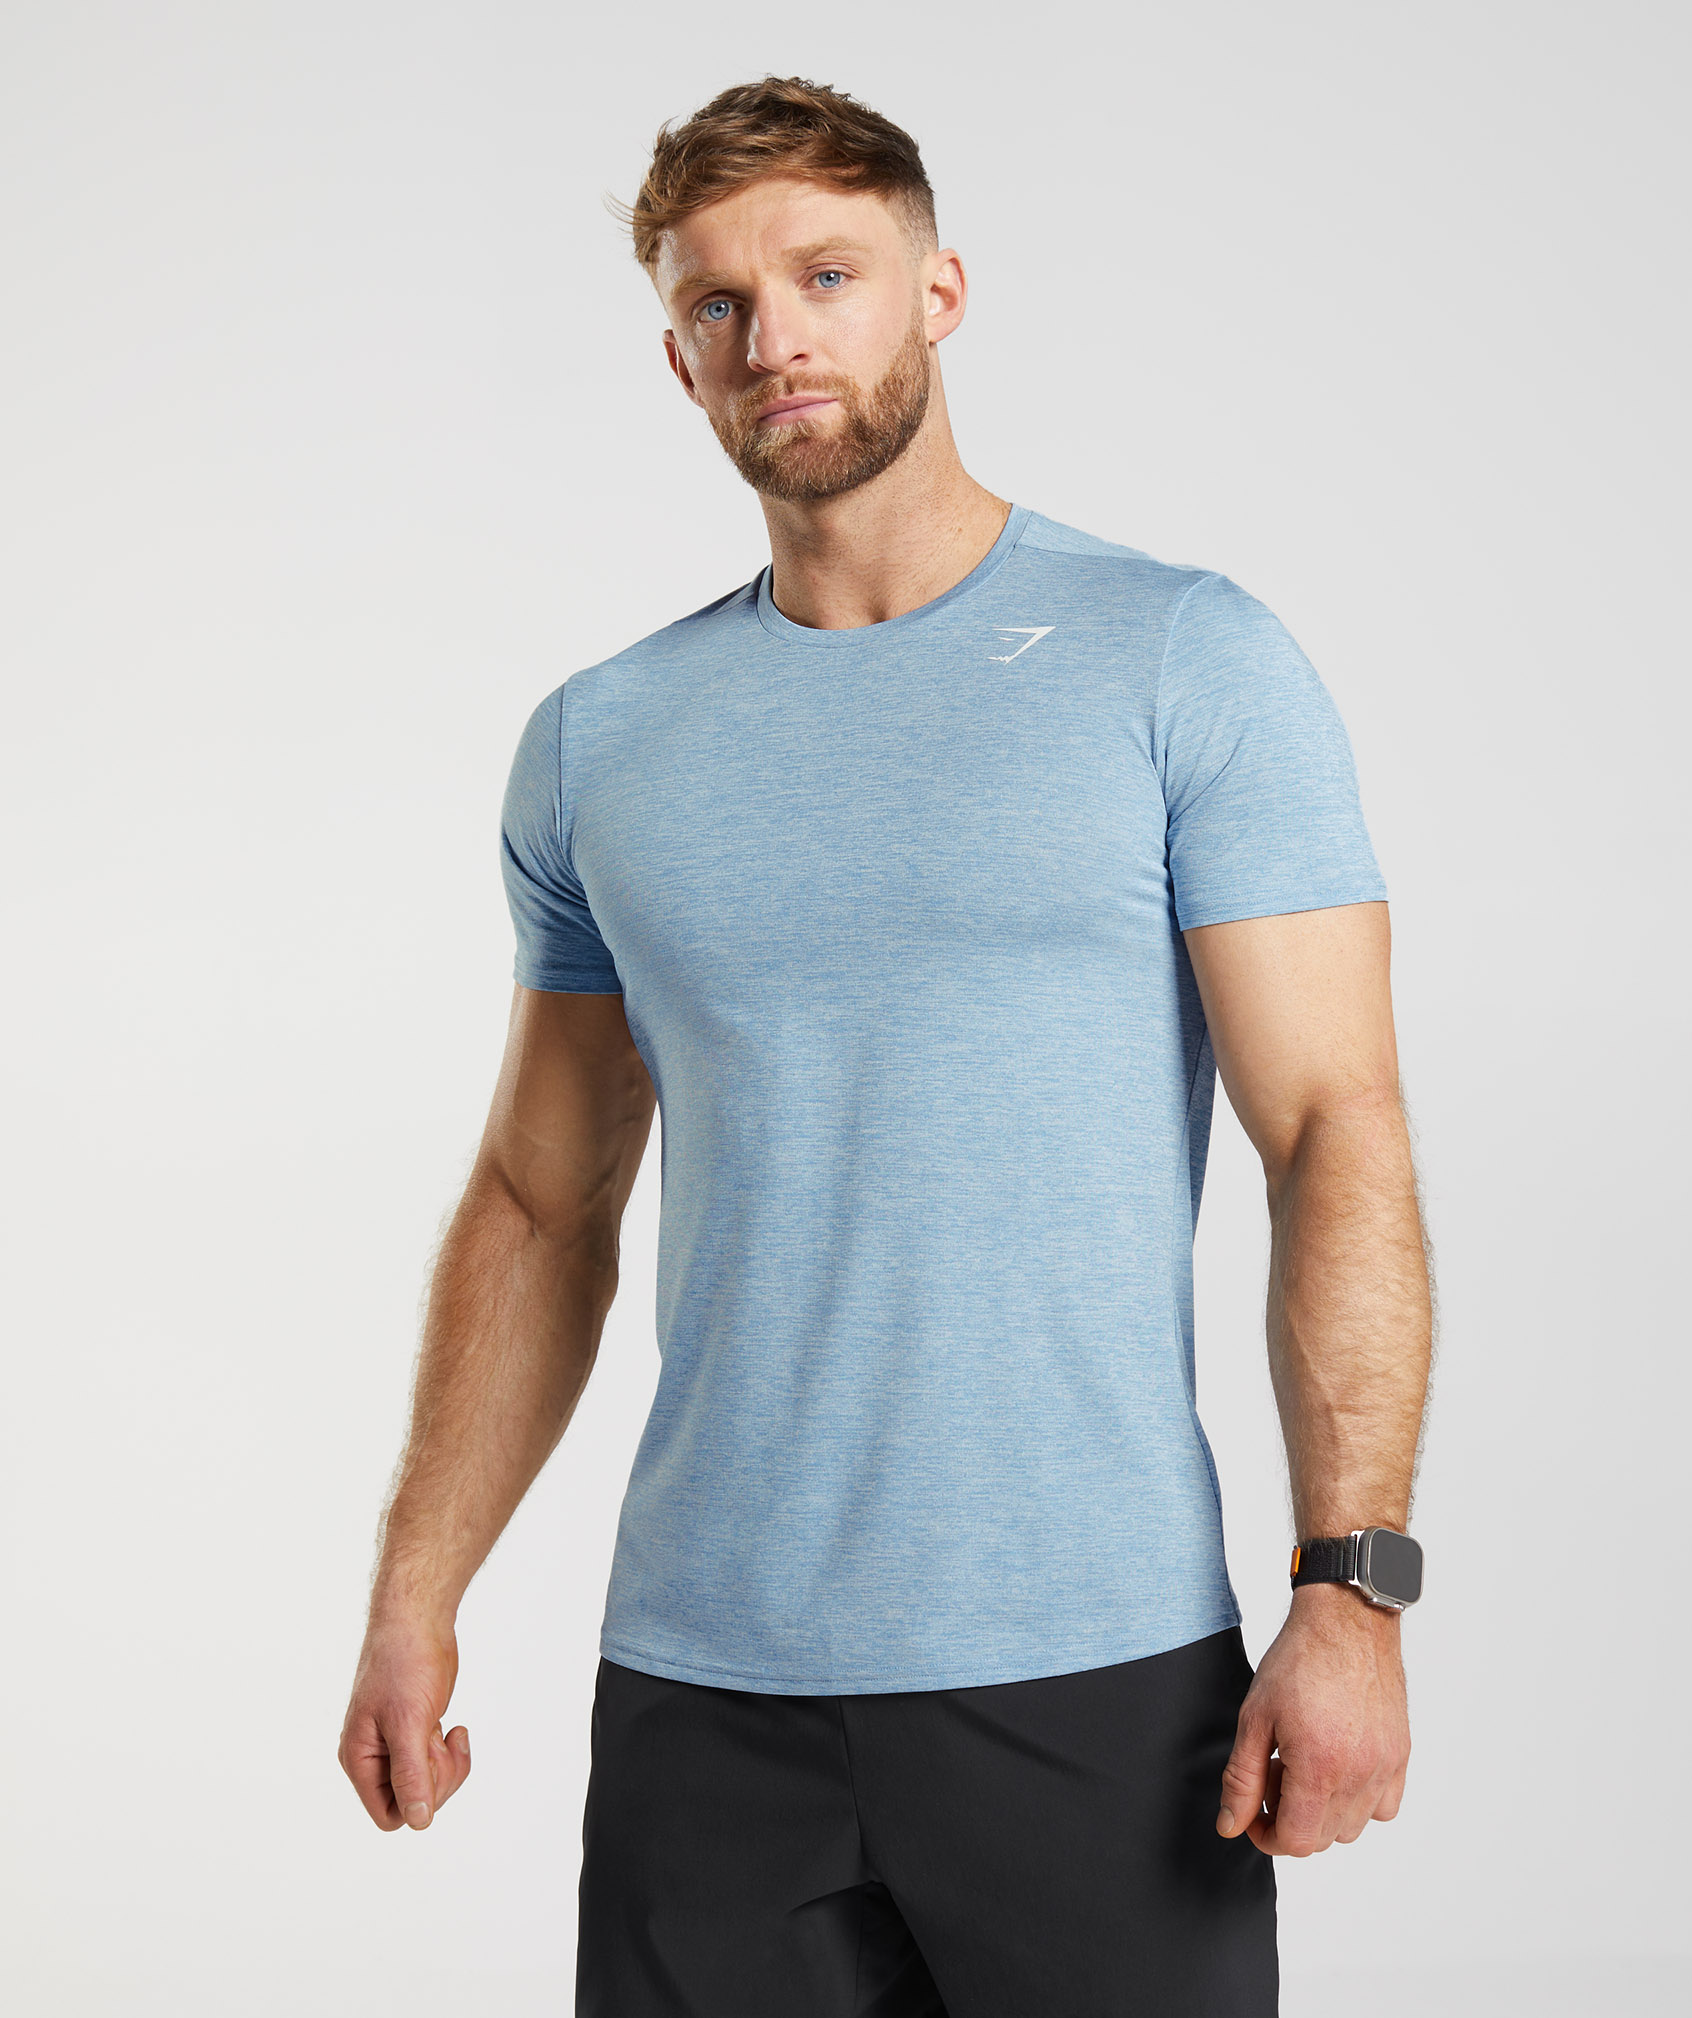 The Best Workout Clothes for Men